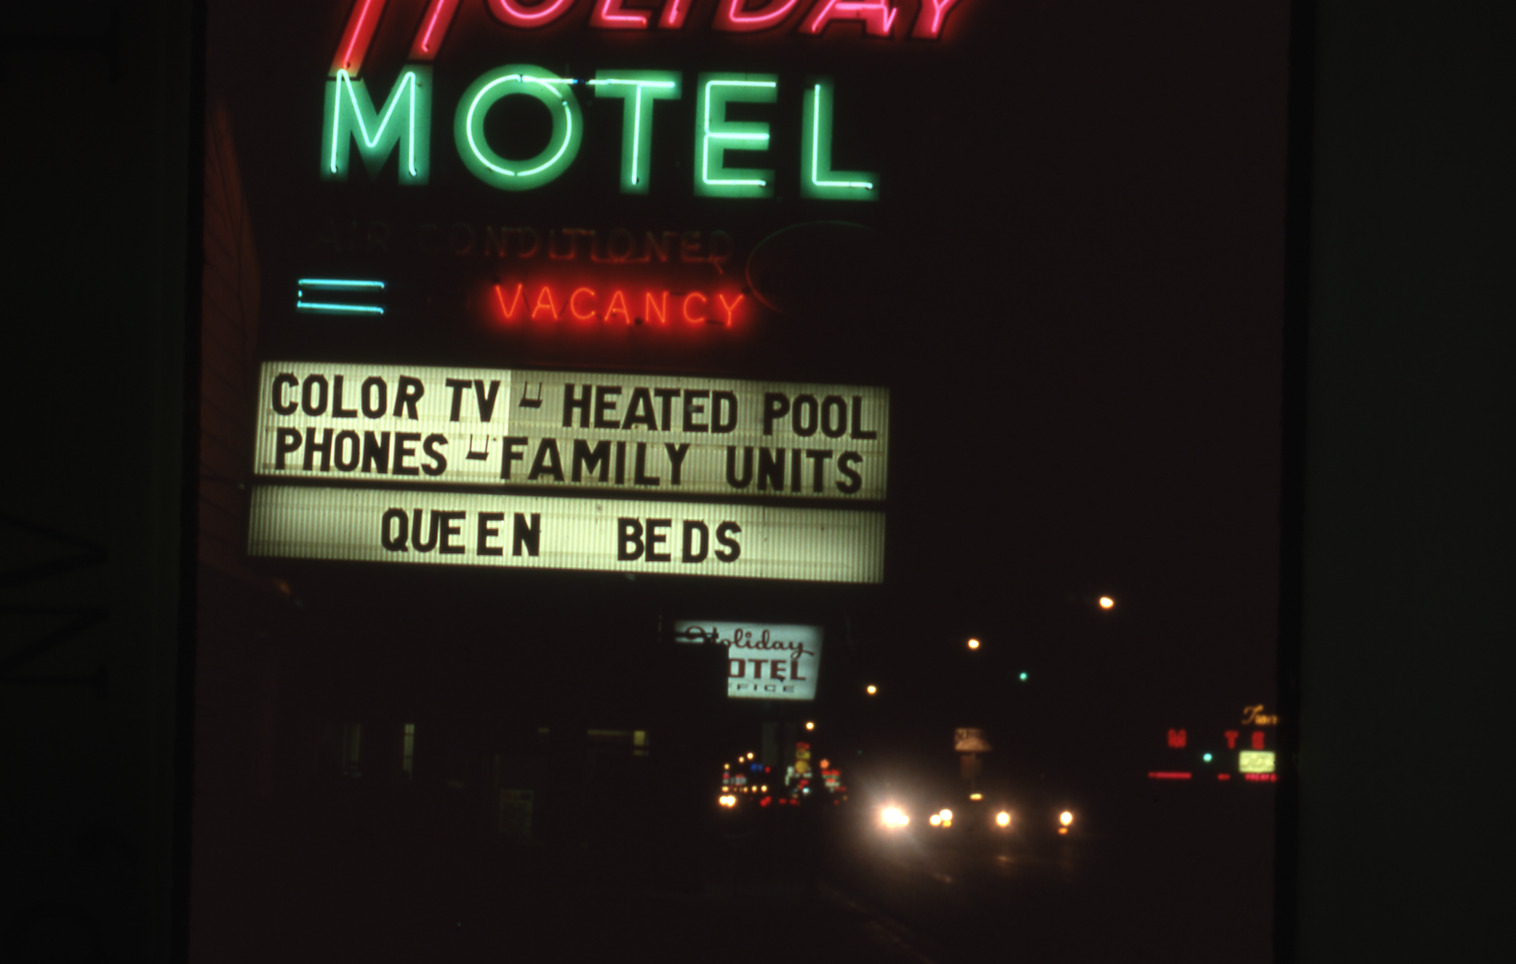 Holiday Motel pylon and marquee sign, Elko, Nevada: photographic print